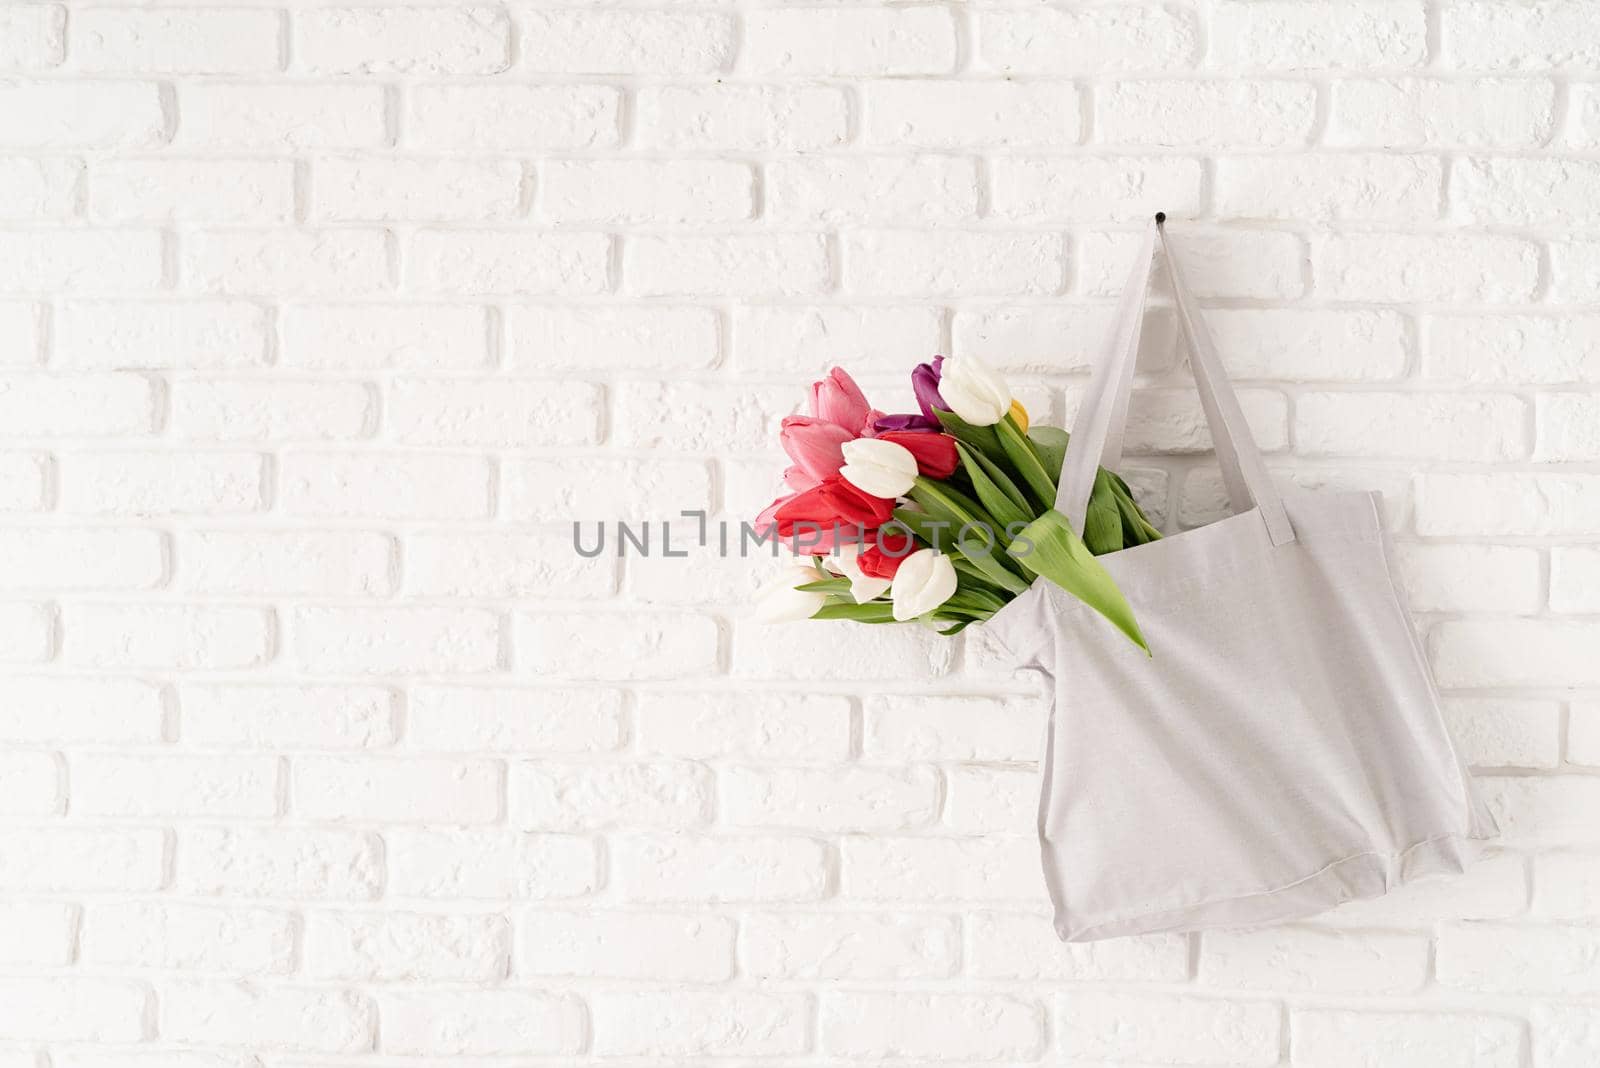 Gray fabric bag full of colorful tulips on white brick background by Desperada